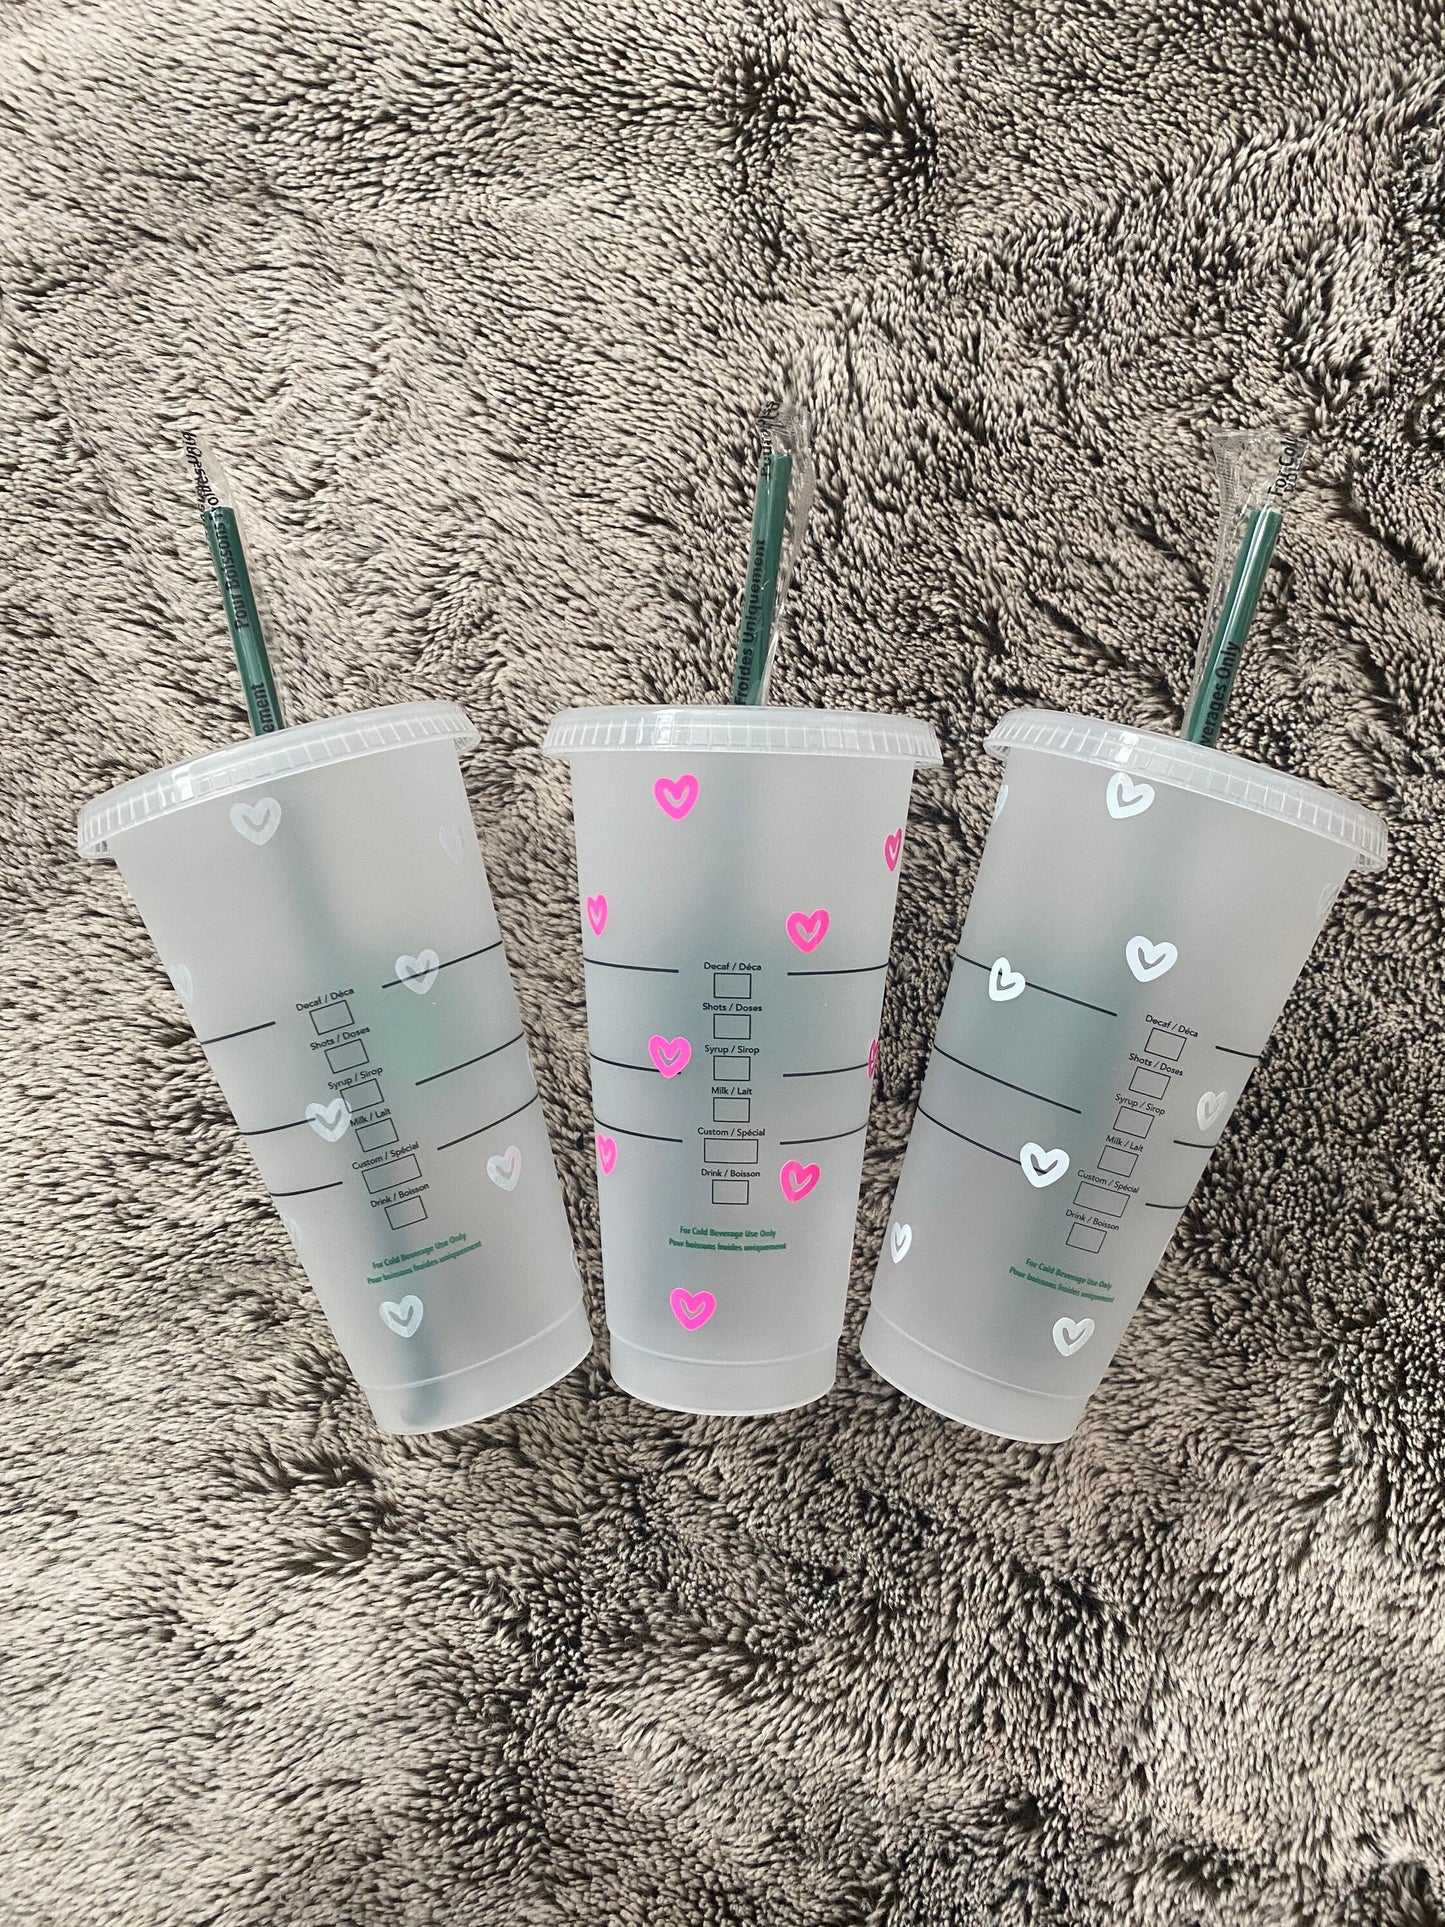 Color Changing Starbucks Cup | Full Wrap Hearts Starbucks Cold Cup | Birthday Gift | Gift for her